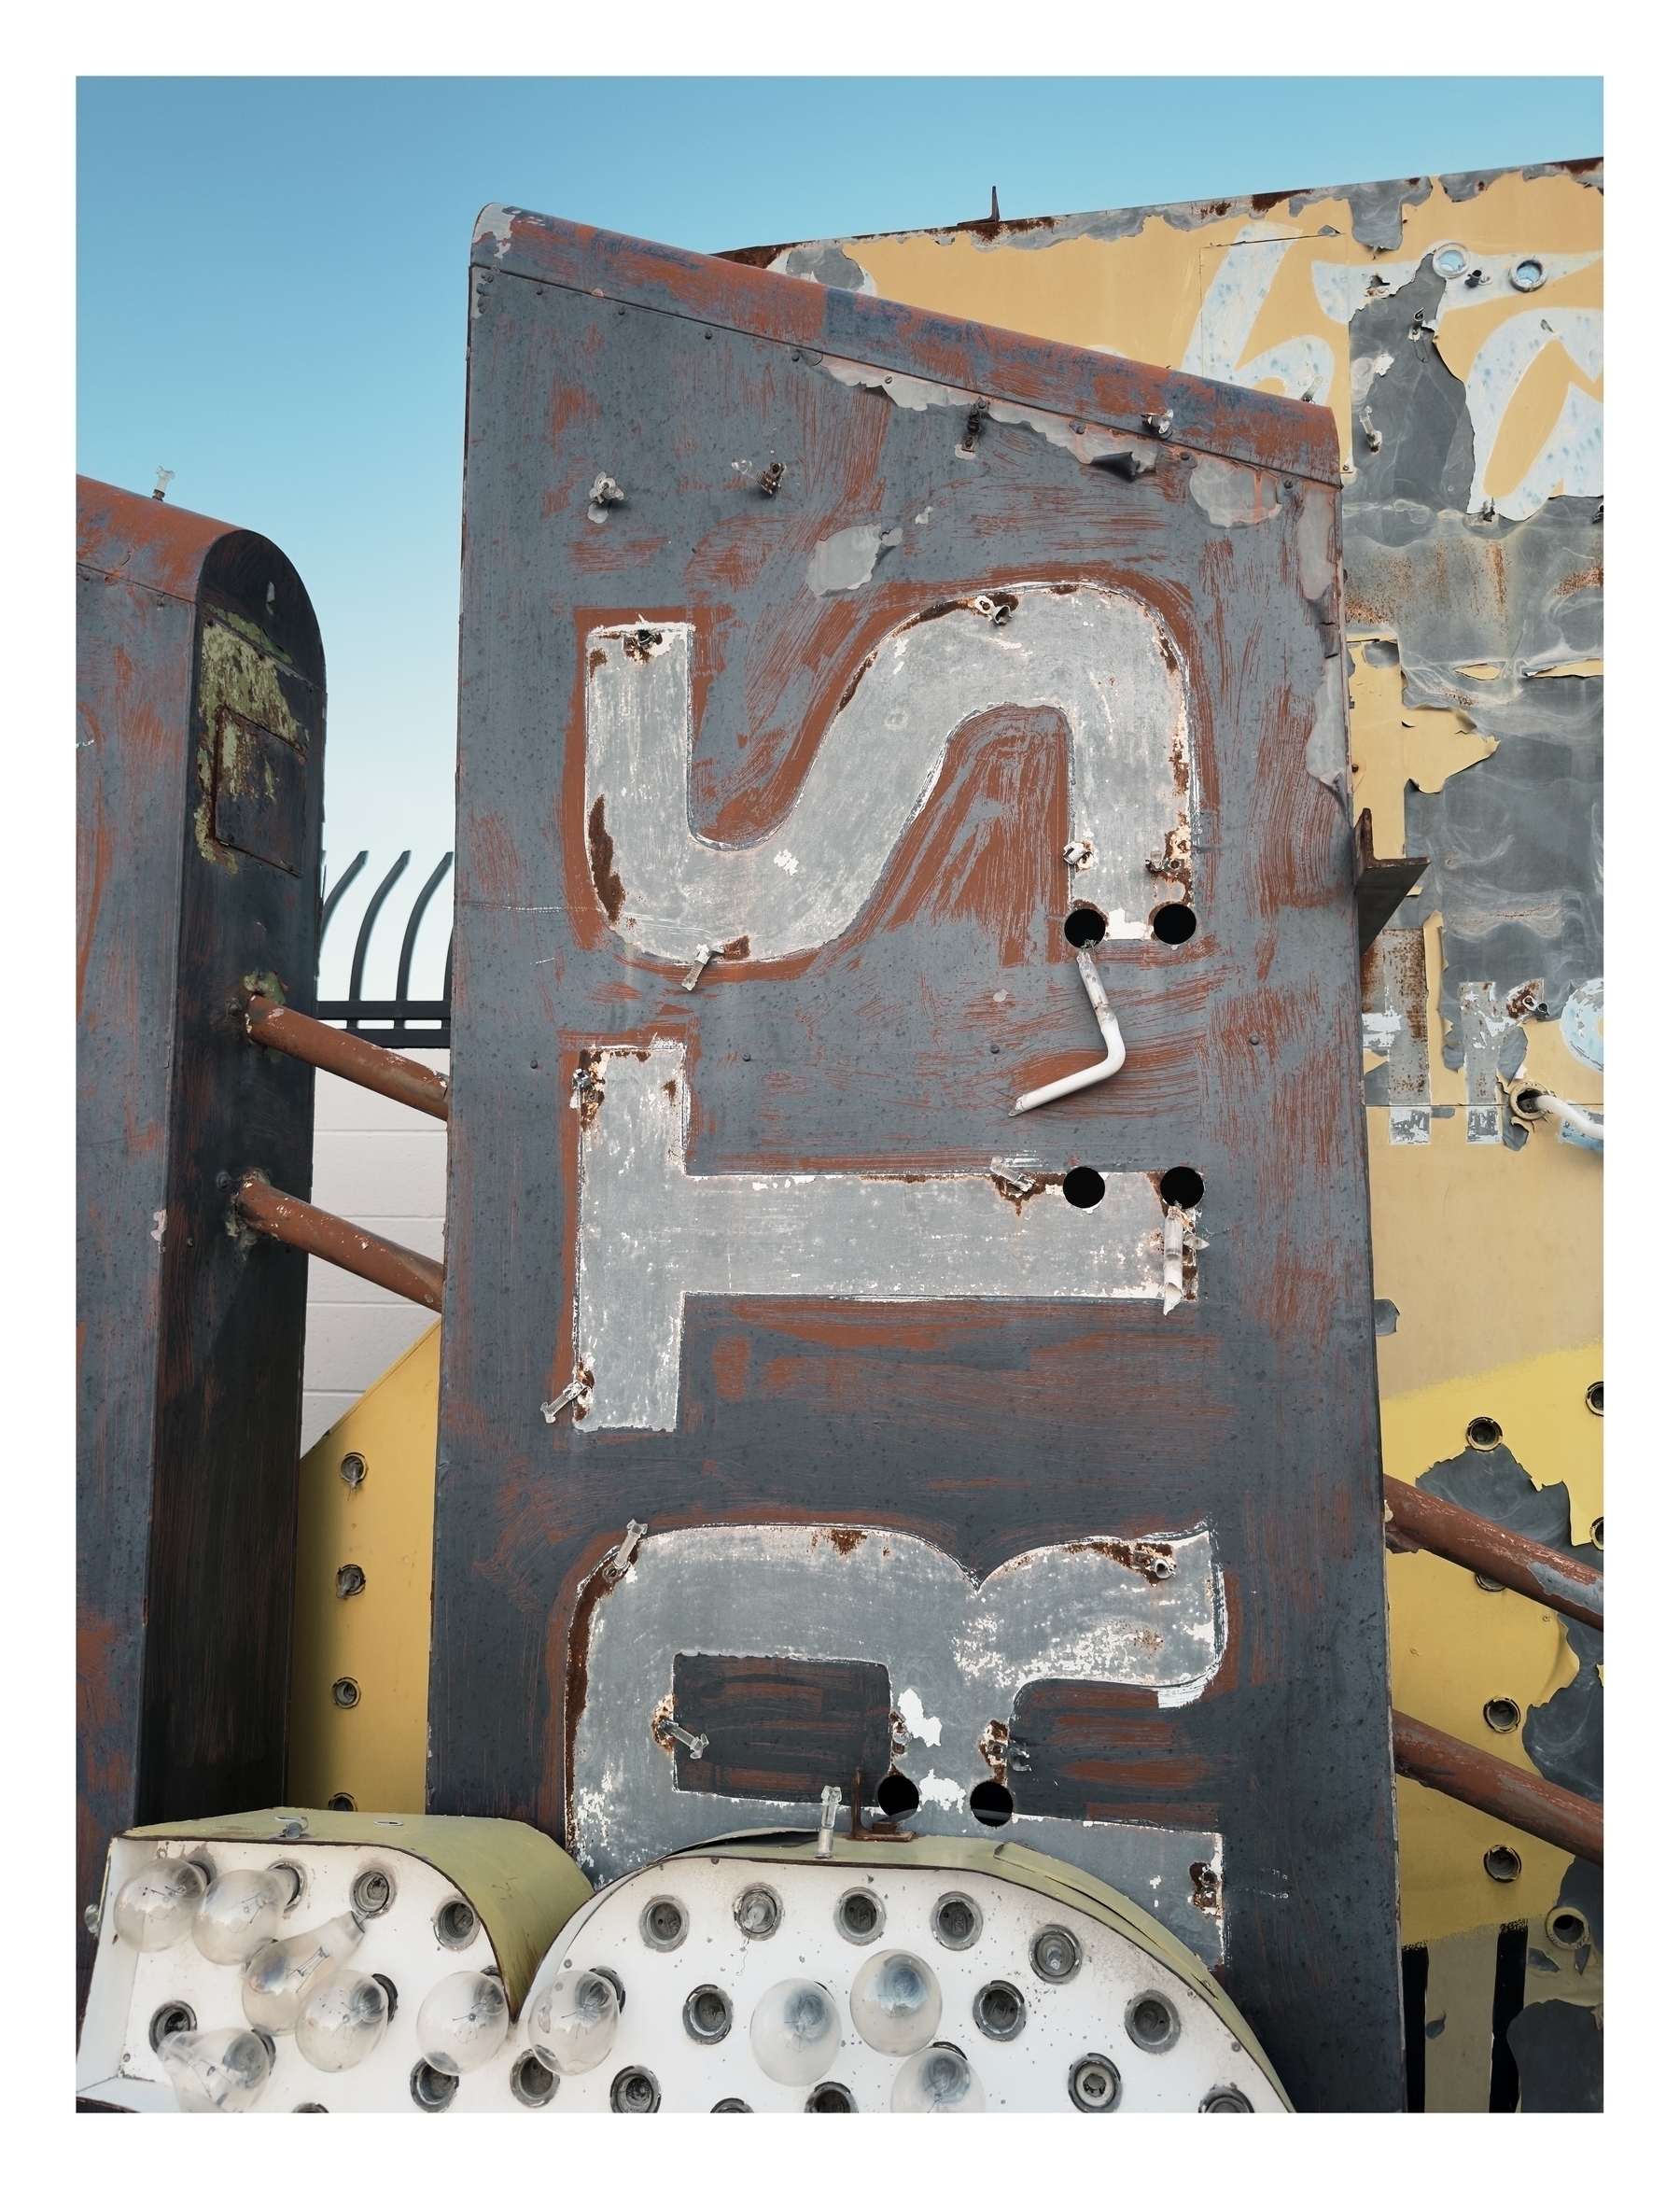 Aged and weathered signage parts, with peeling paint and rust, are stacked against a clear sky.